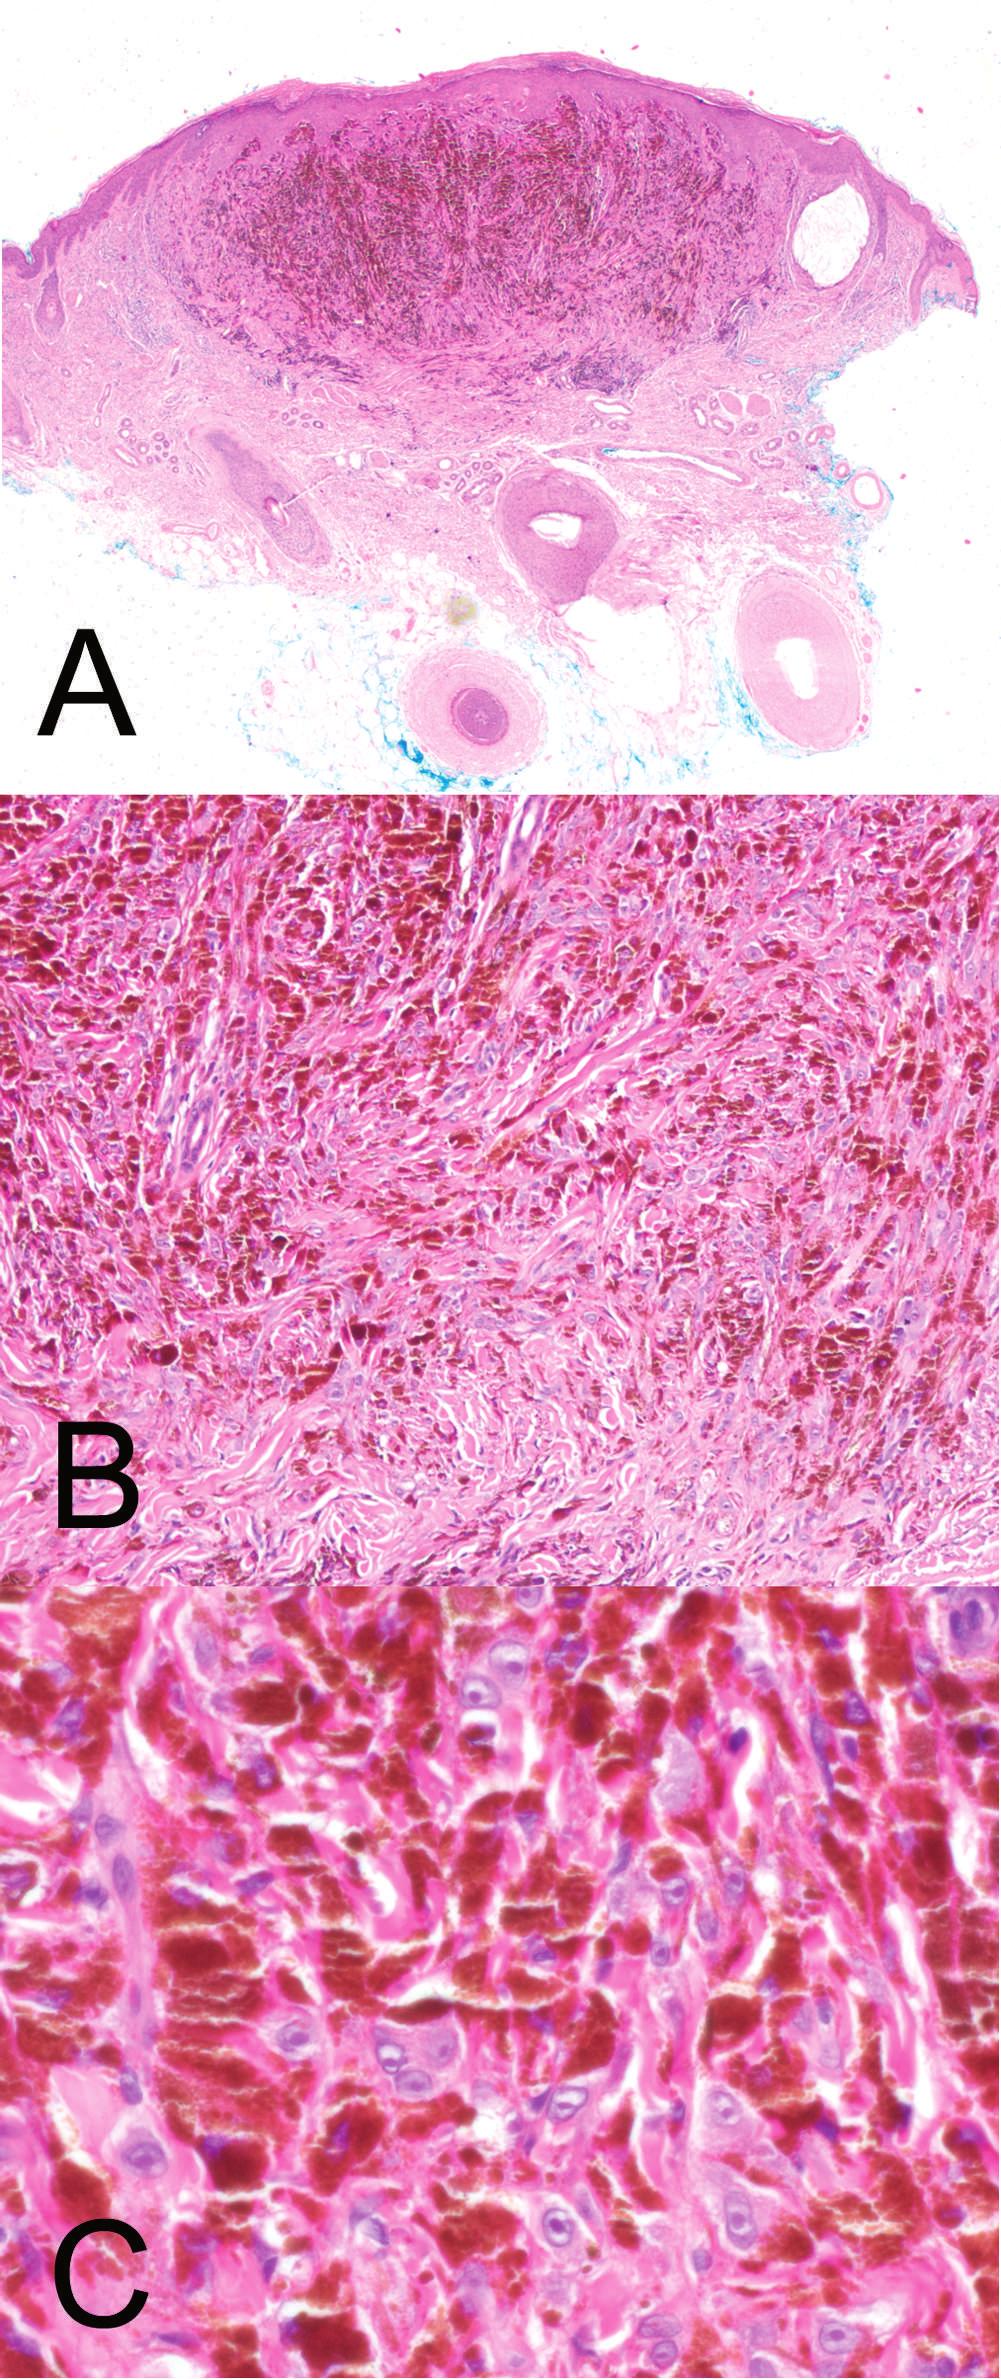 Figure 1. Skin biopsy specimen of a deeply pigmented skin lesion on neck from a 46-year-old man, which was diagnosed as pigmented epithelioid melanocytoma. A sentinel node biopsy was not performed.